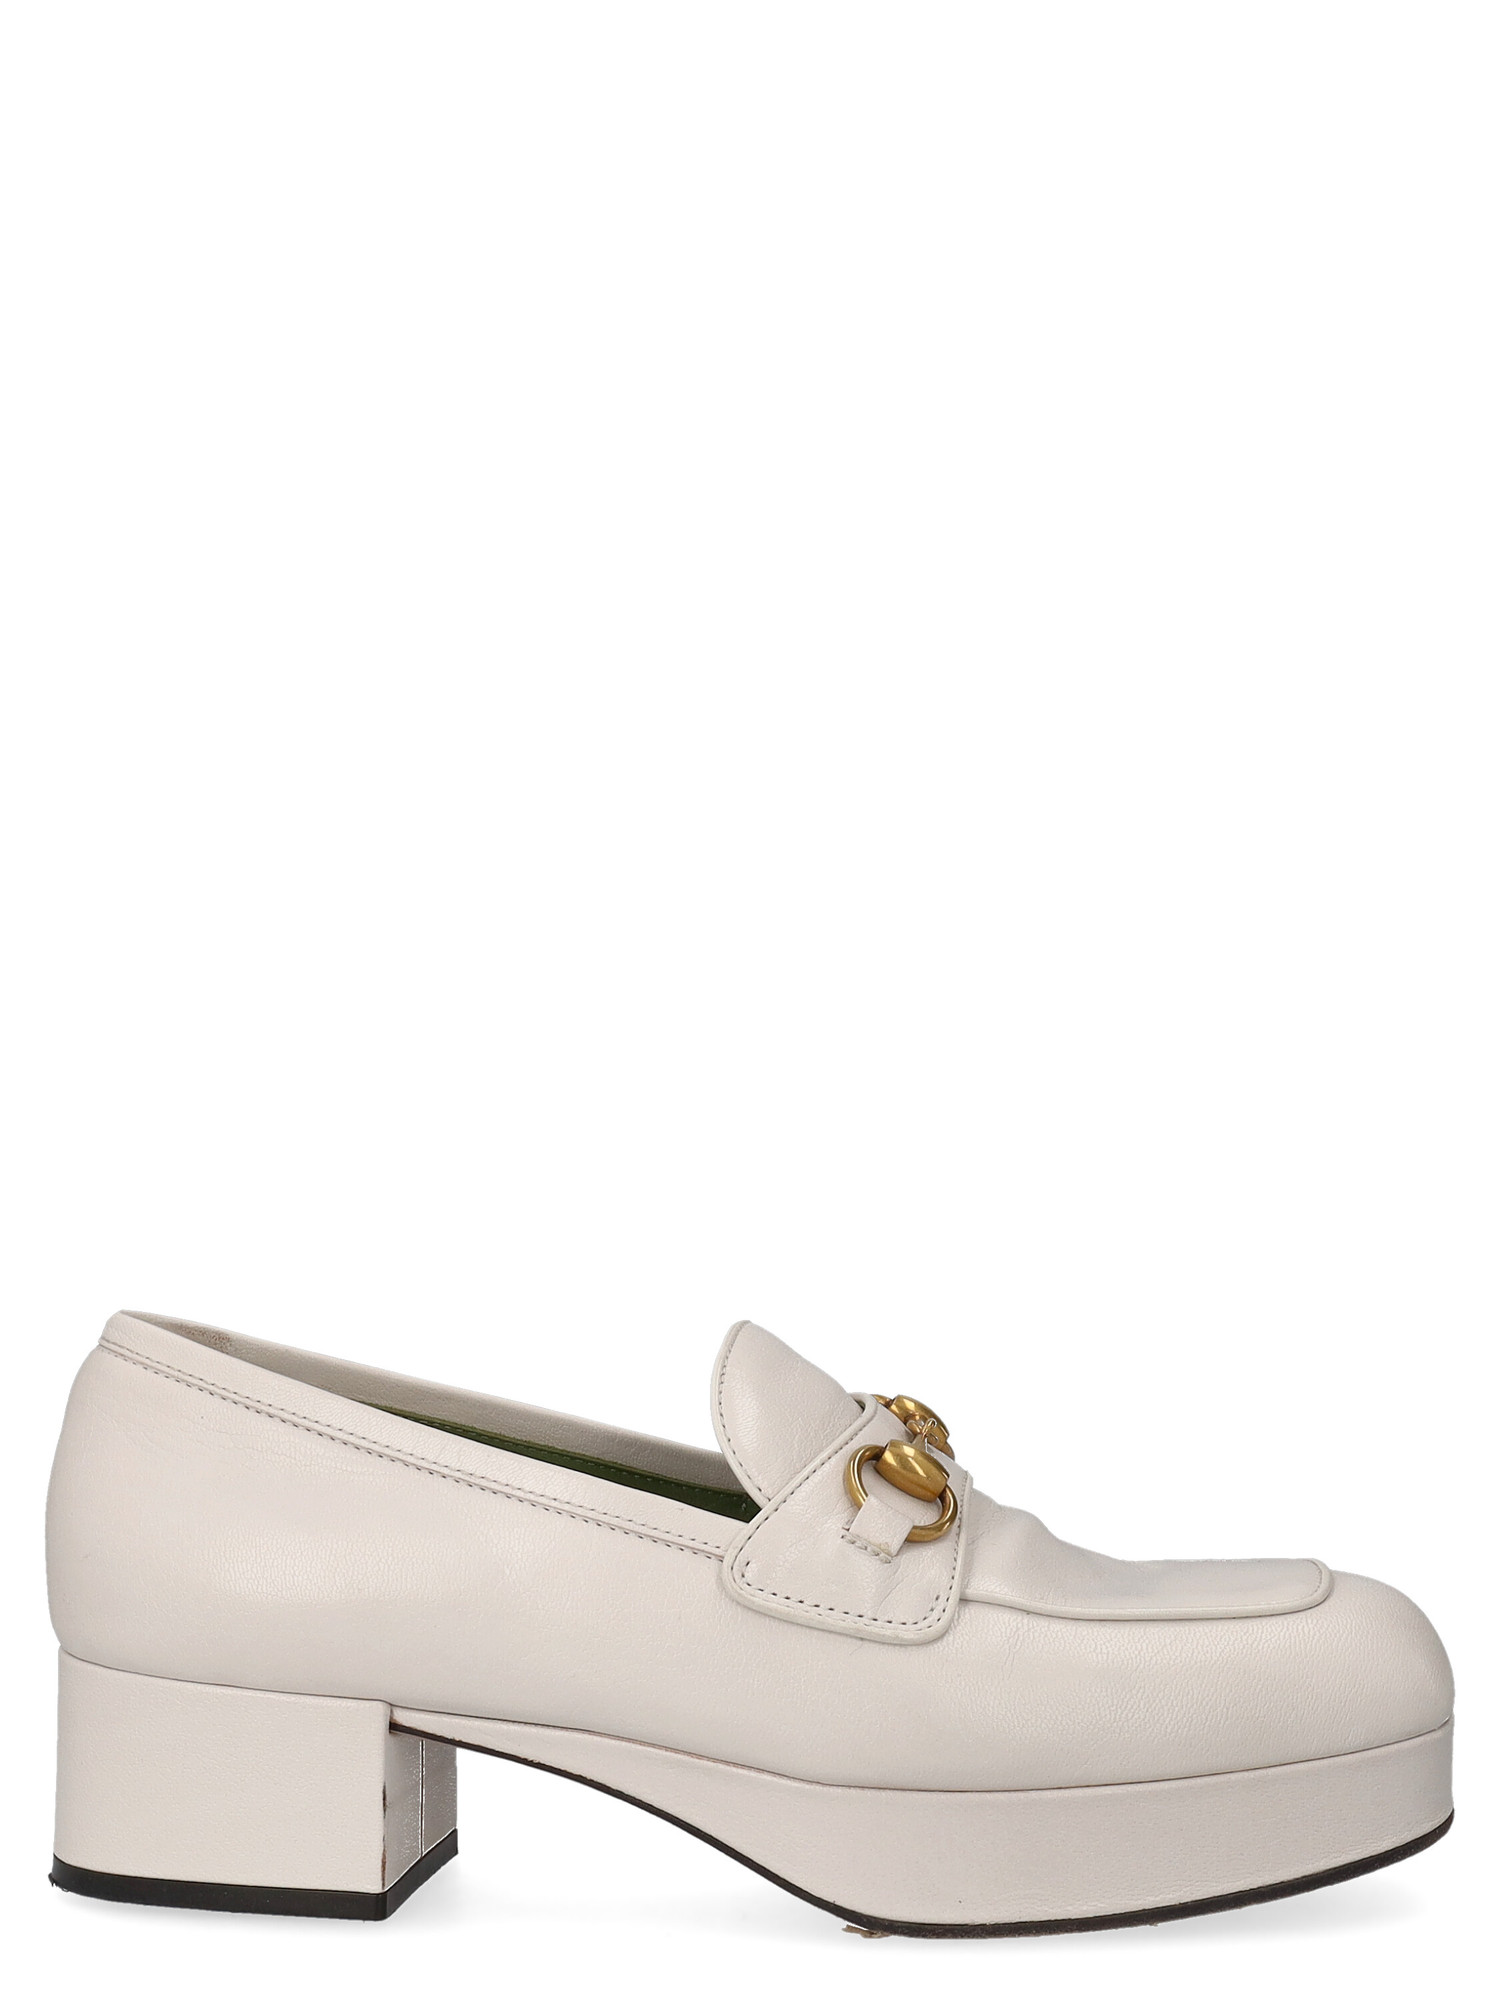 Pre-owned Gucci Woman In White